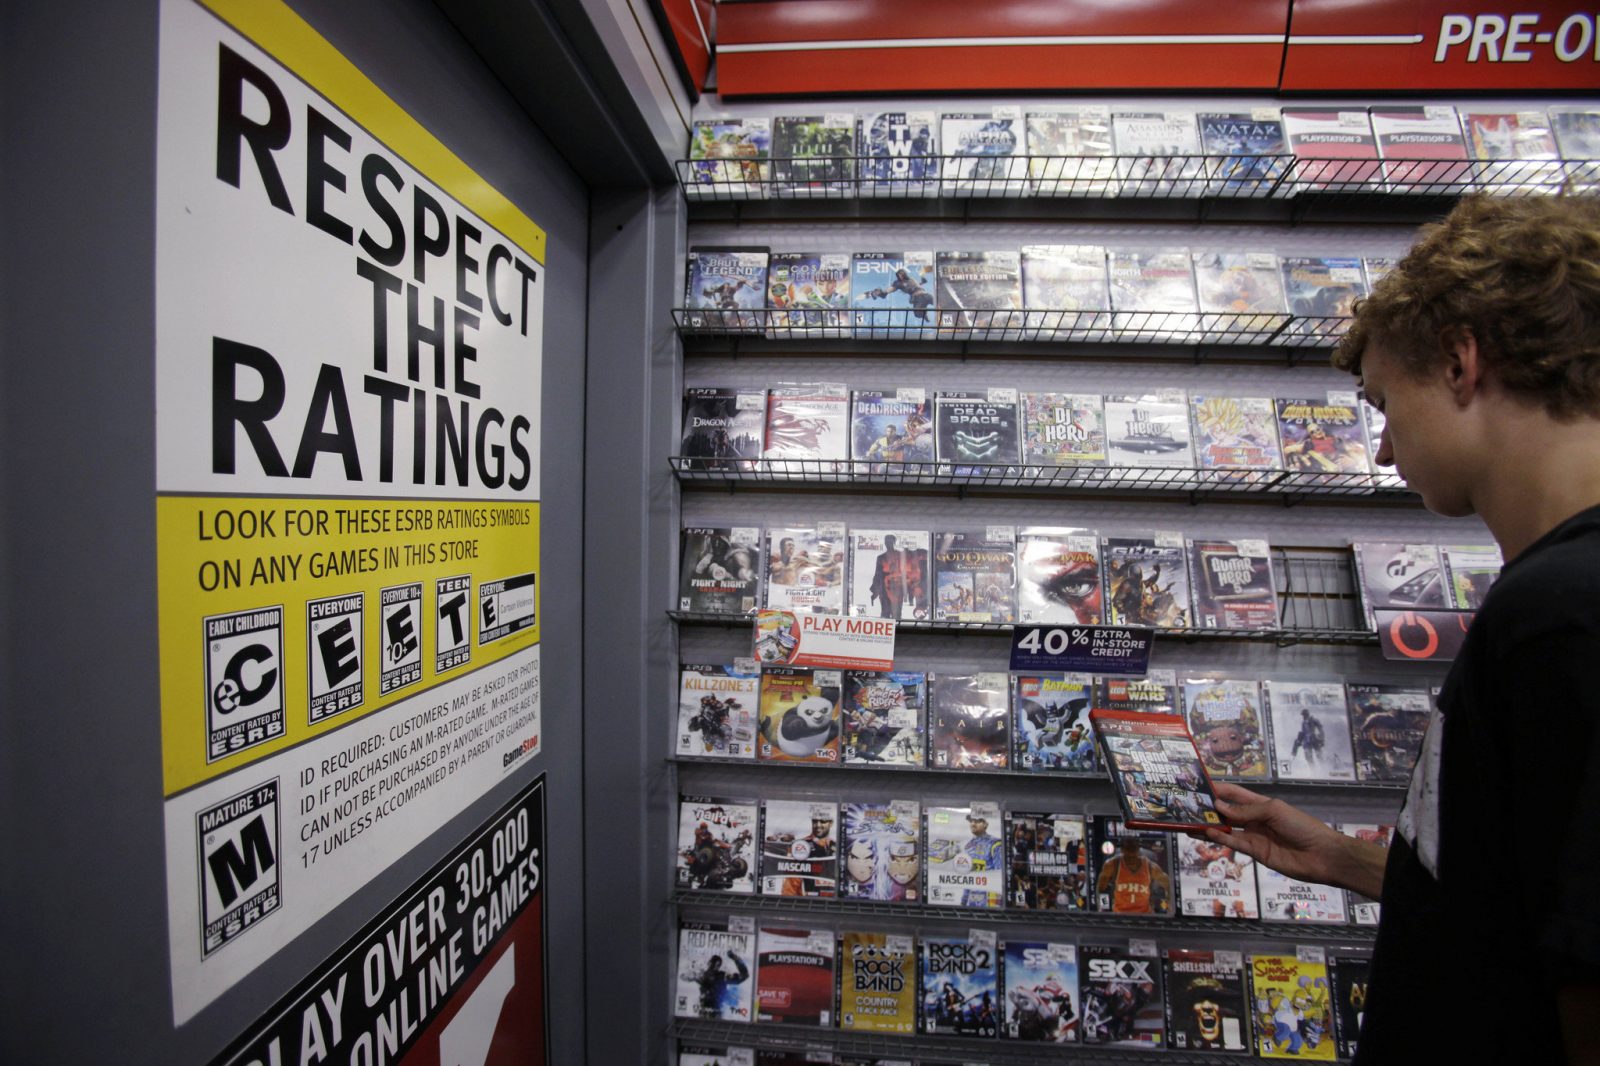 Top 3 Mistakes to Avoid When Buying Video Games